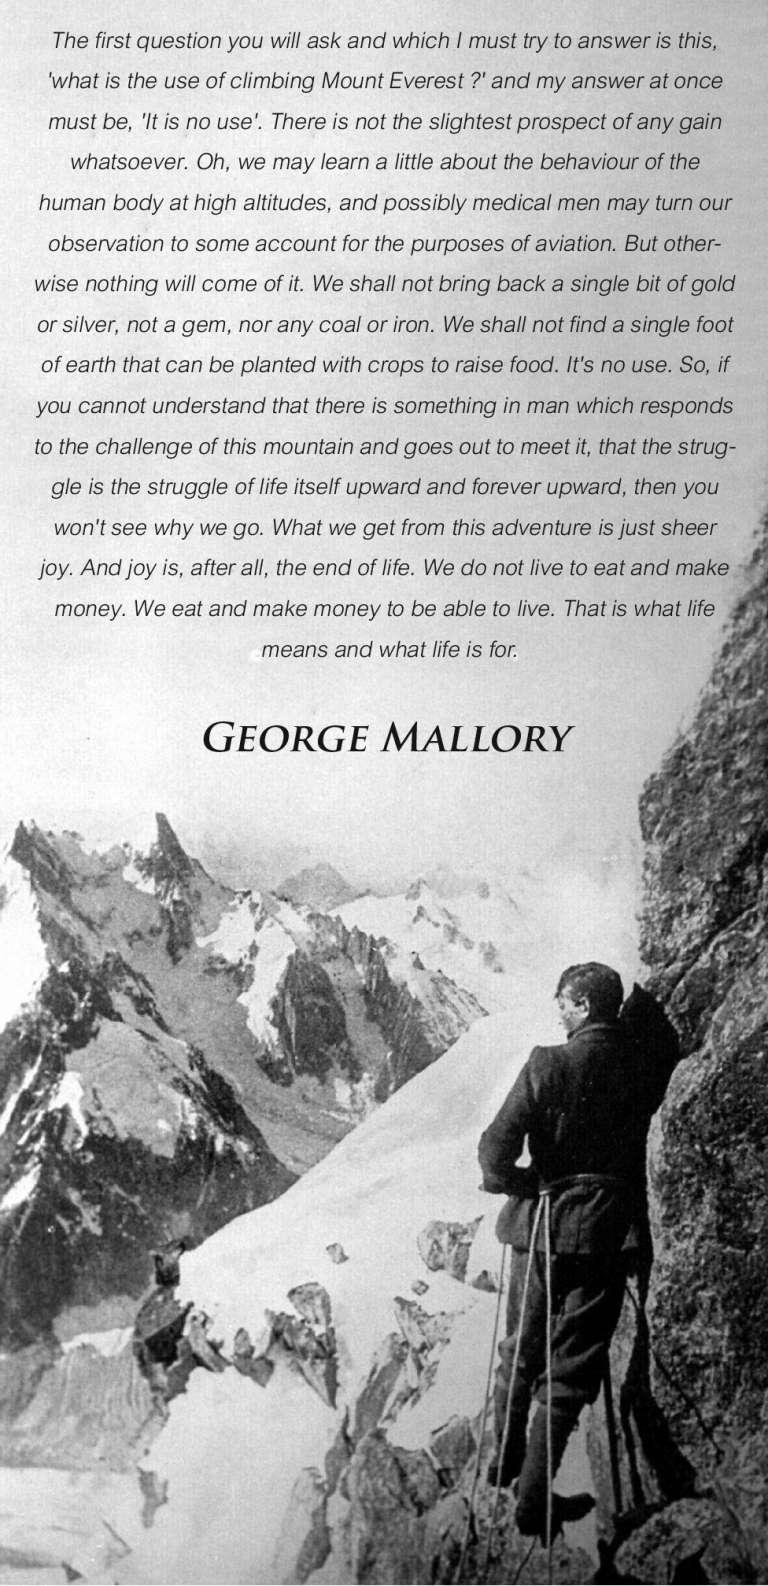 What life means according to George Mallory...